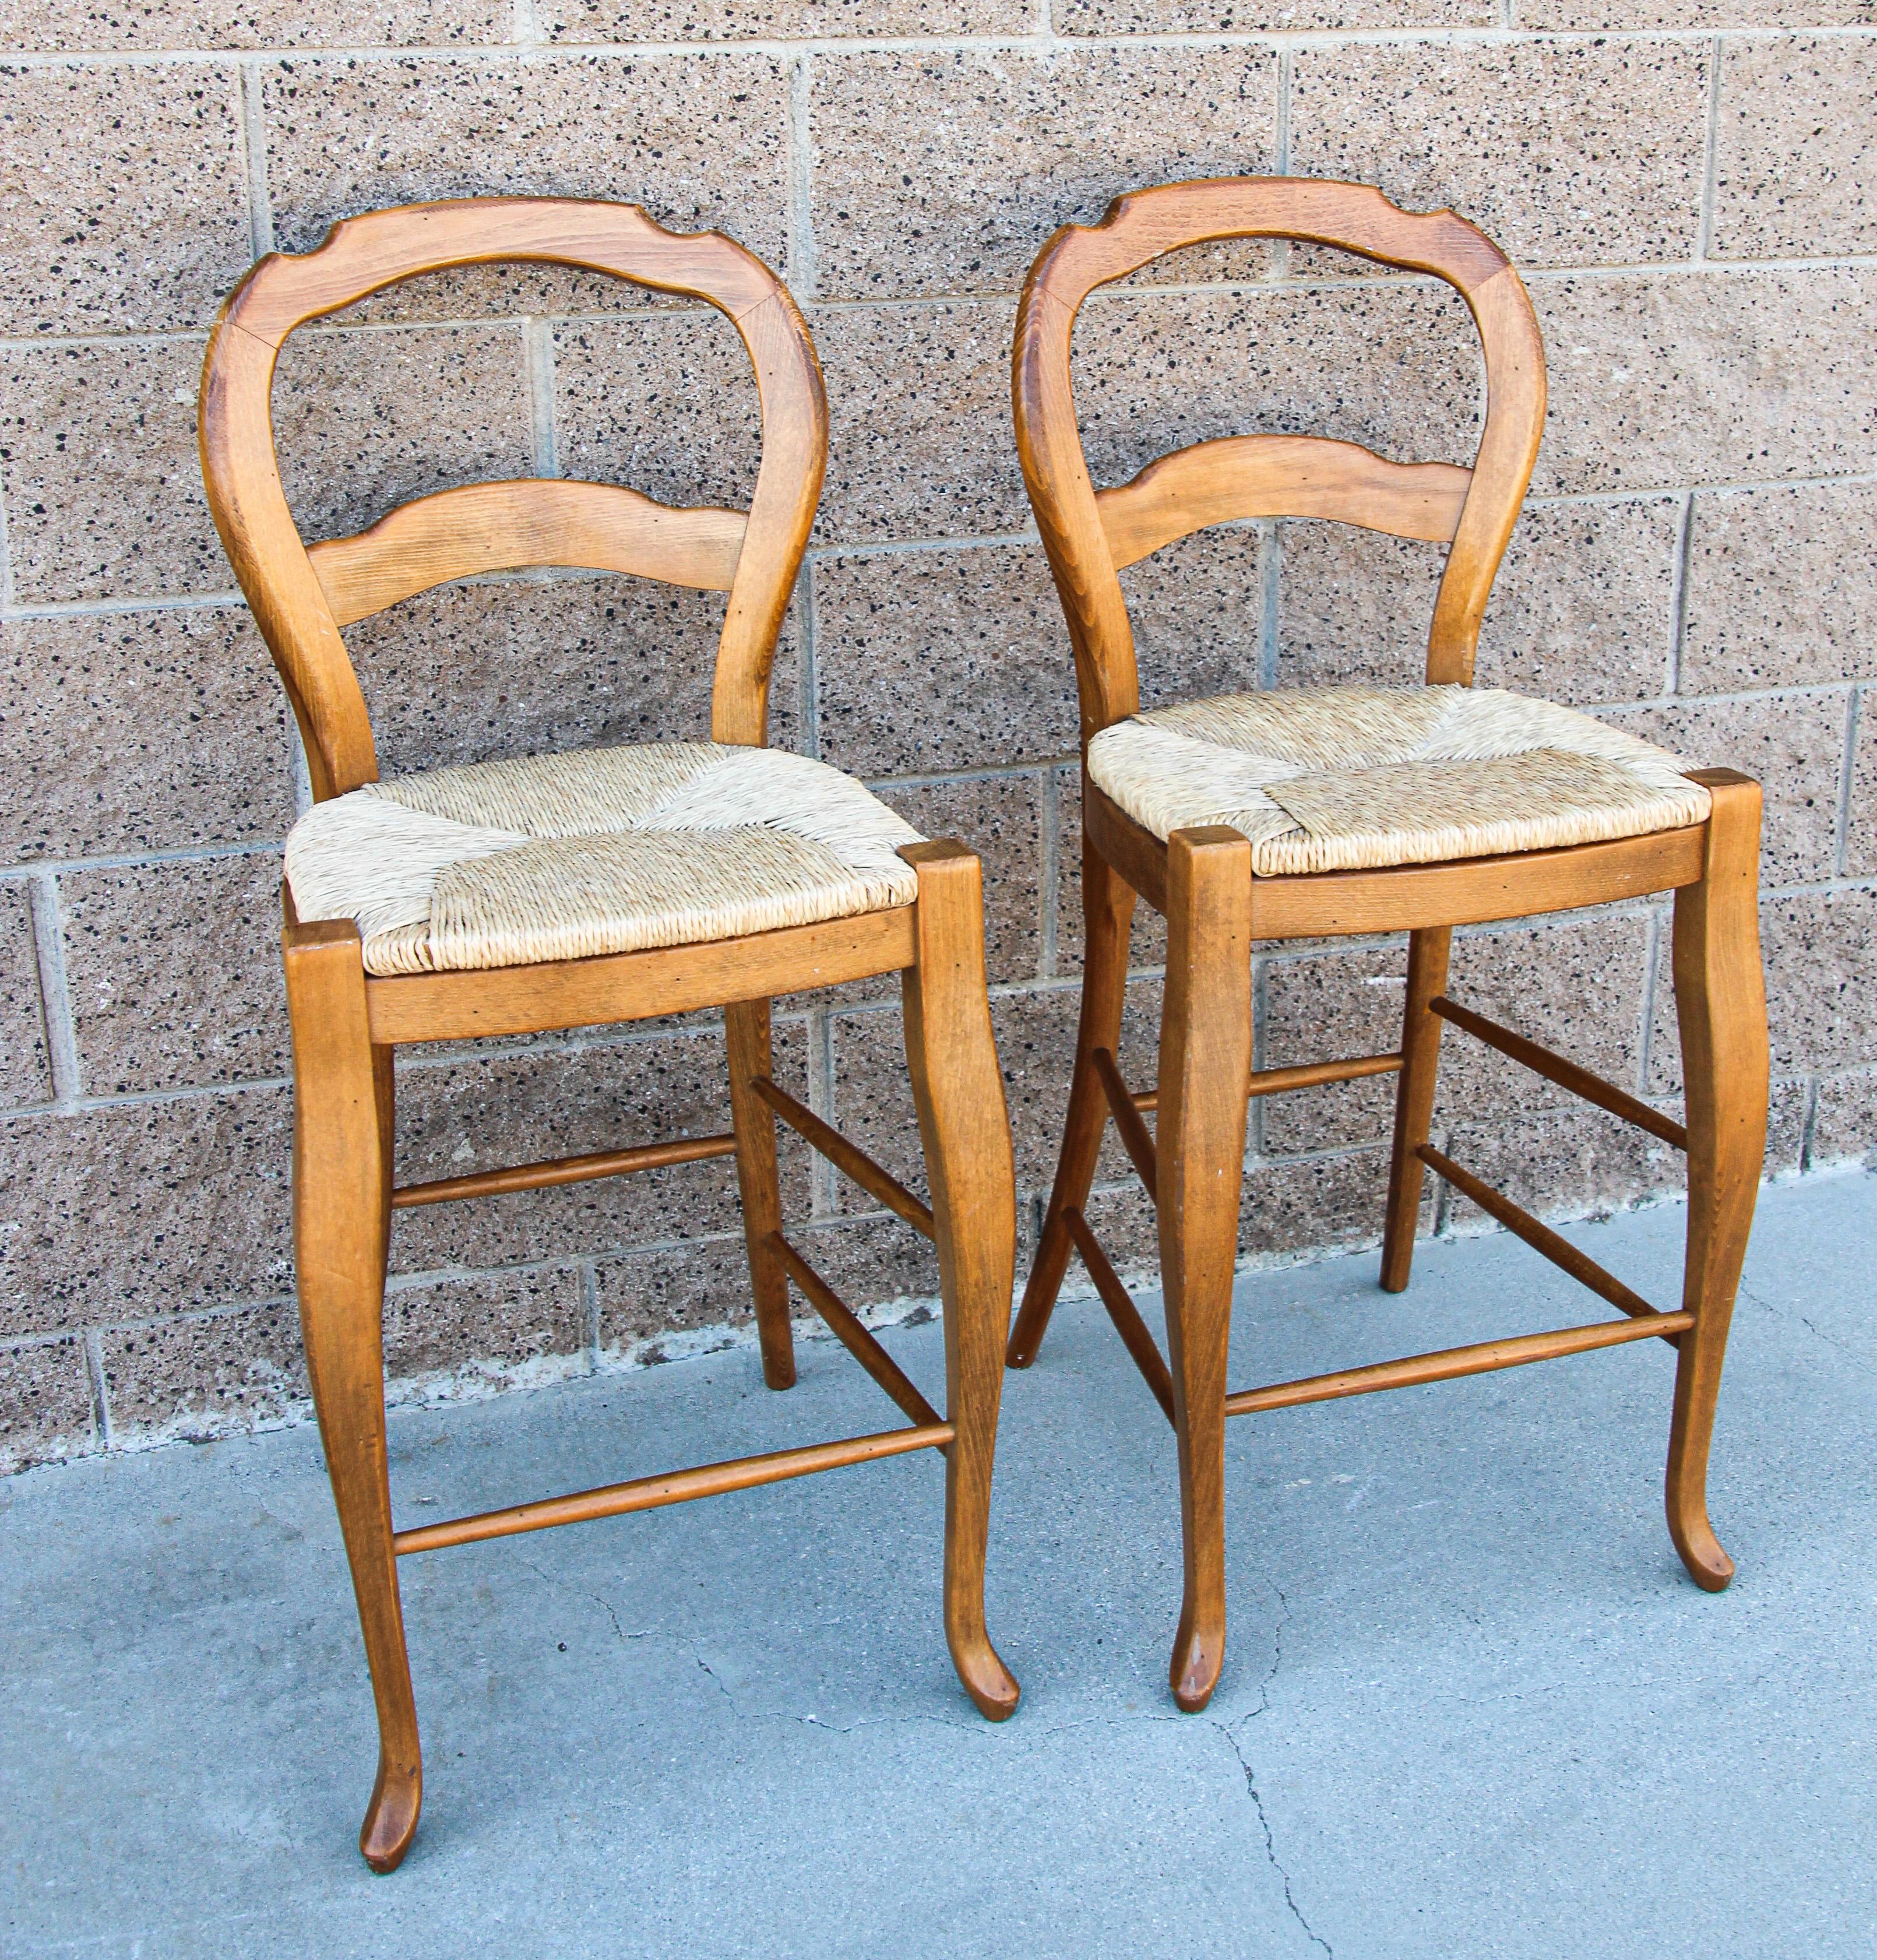 Pair of Provincial French Country Italian rush seat wood barstools.
These vintage bar stools would give the perfect French European Country provincial look.
Pine waxed finish, rush woven seats.
No outstanding flaws.
Circa 2000. Made in